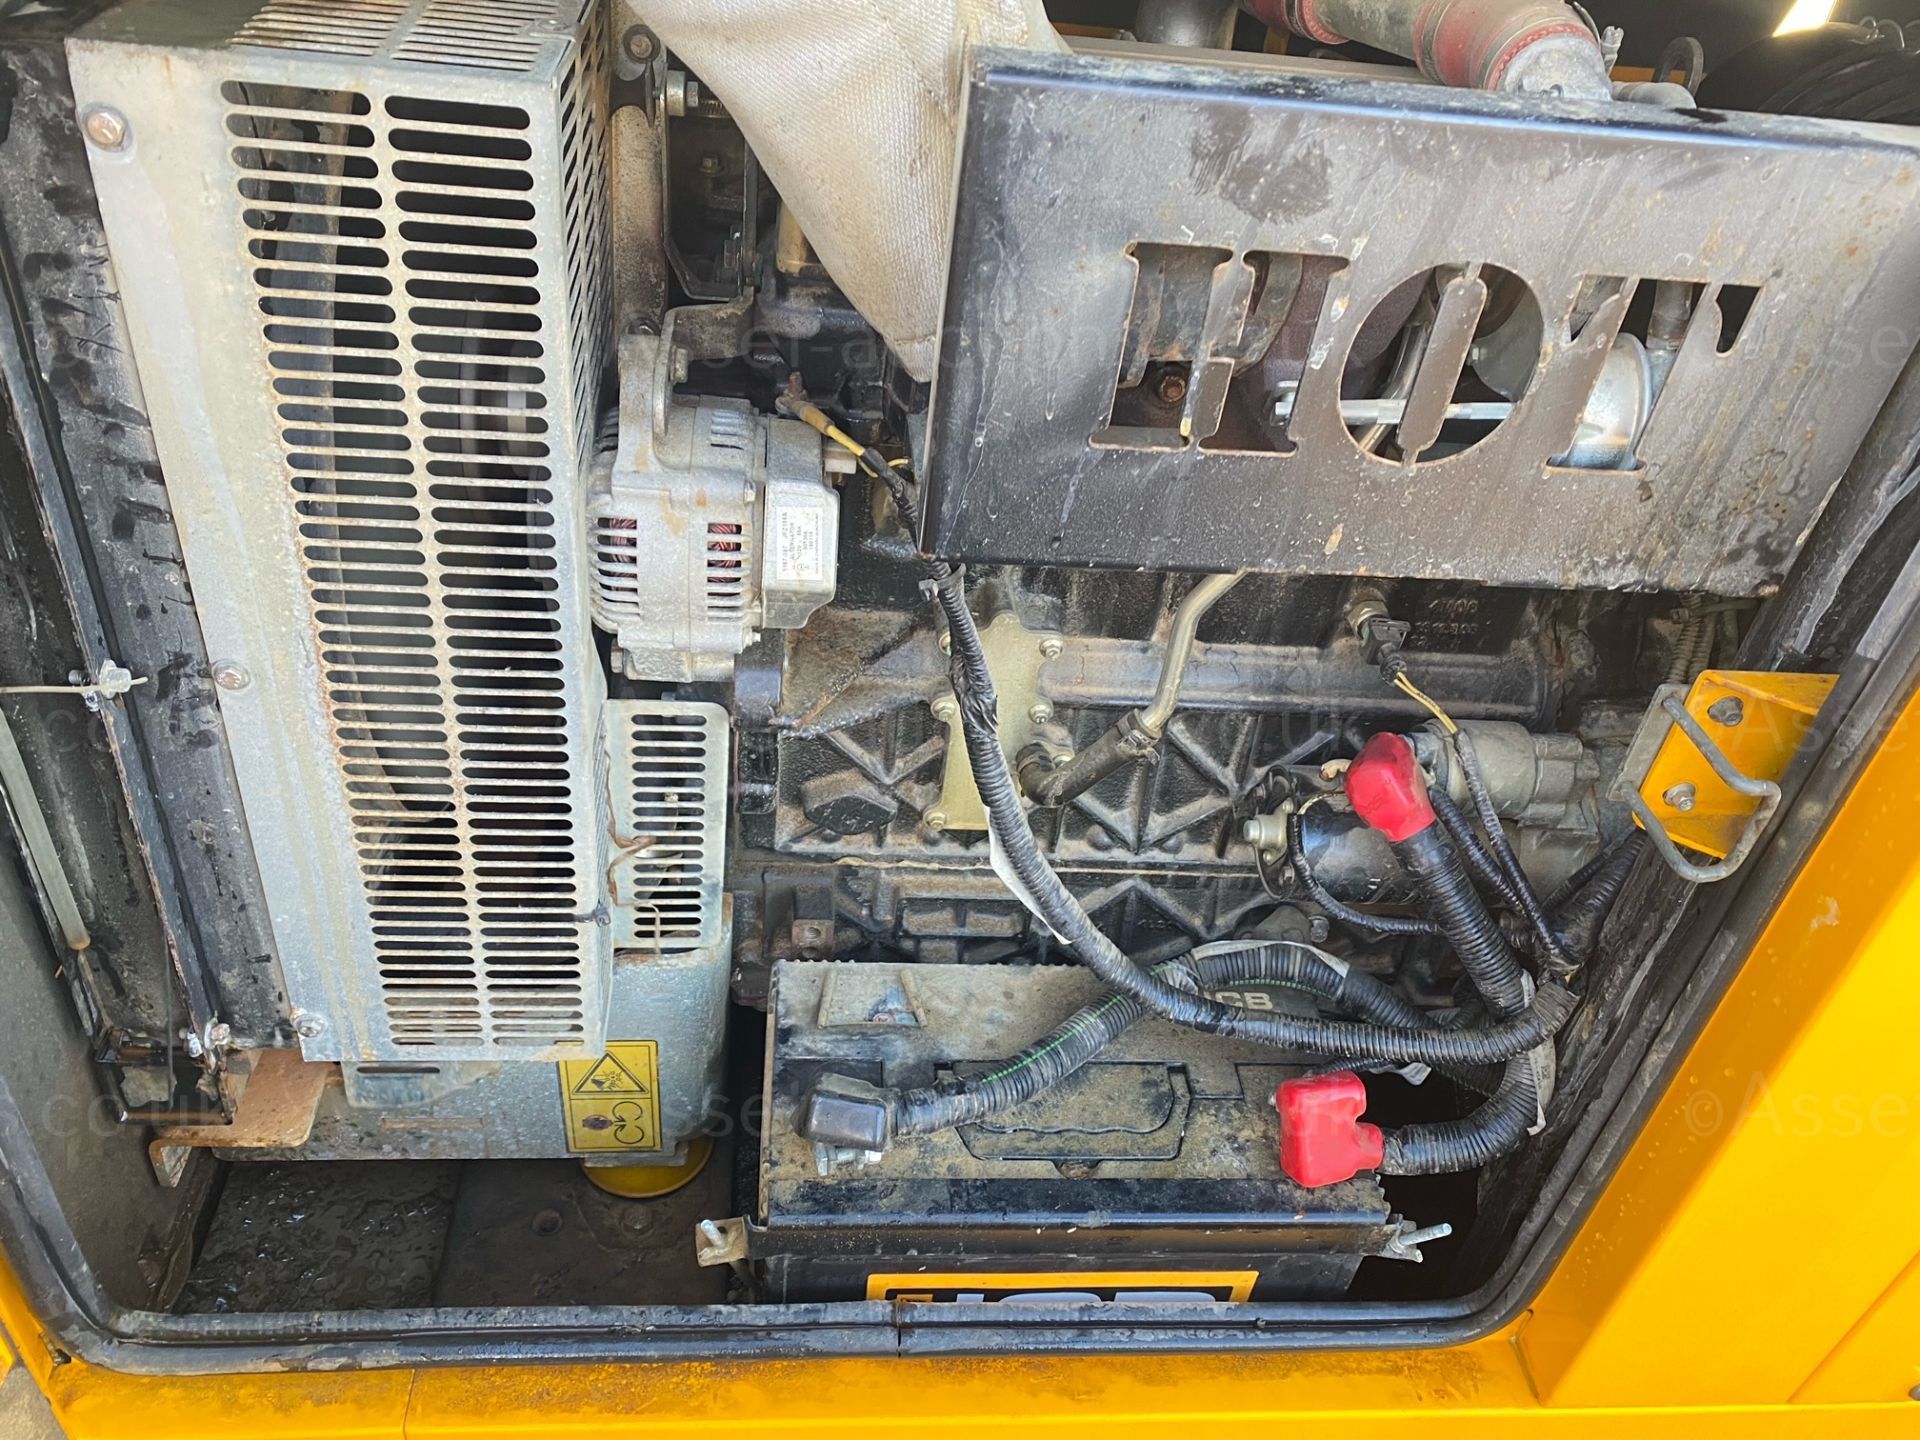 2015 JCB 45 KvA GENERATOR, BOUGHT NEW IN 2016, 4500 HOURS, START RUNS AND PRODUCES POWER *PLUS VAT* - Image 6 of 7